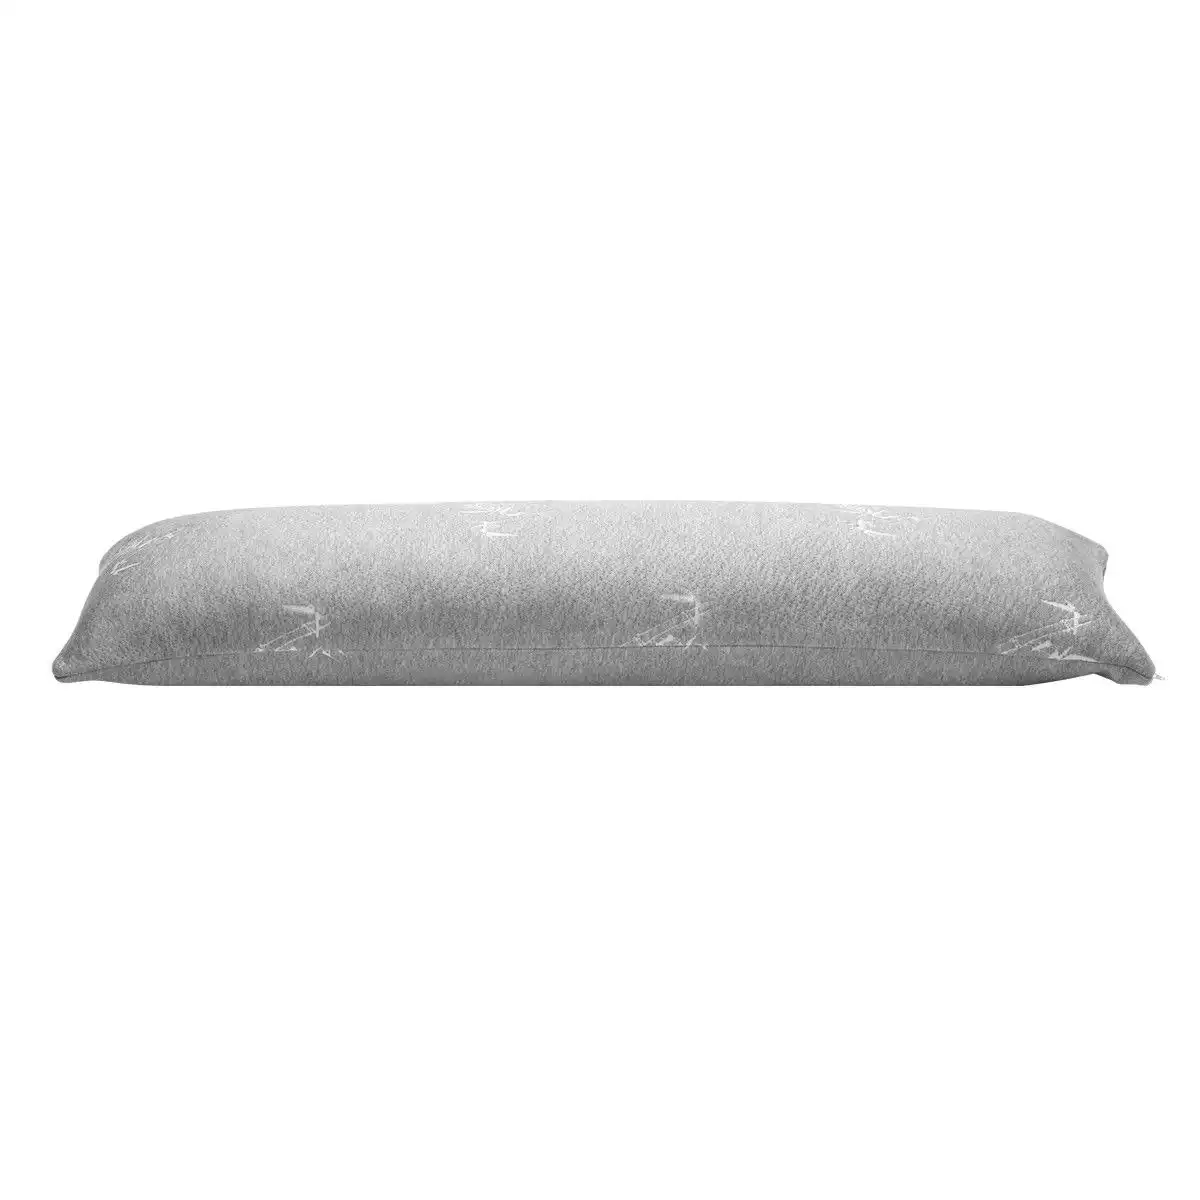 Luxdream  Shredded Memory Foam Body Pillow Support Long Pillow with Bamboo Cover